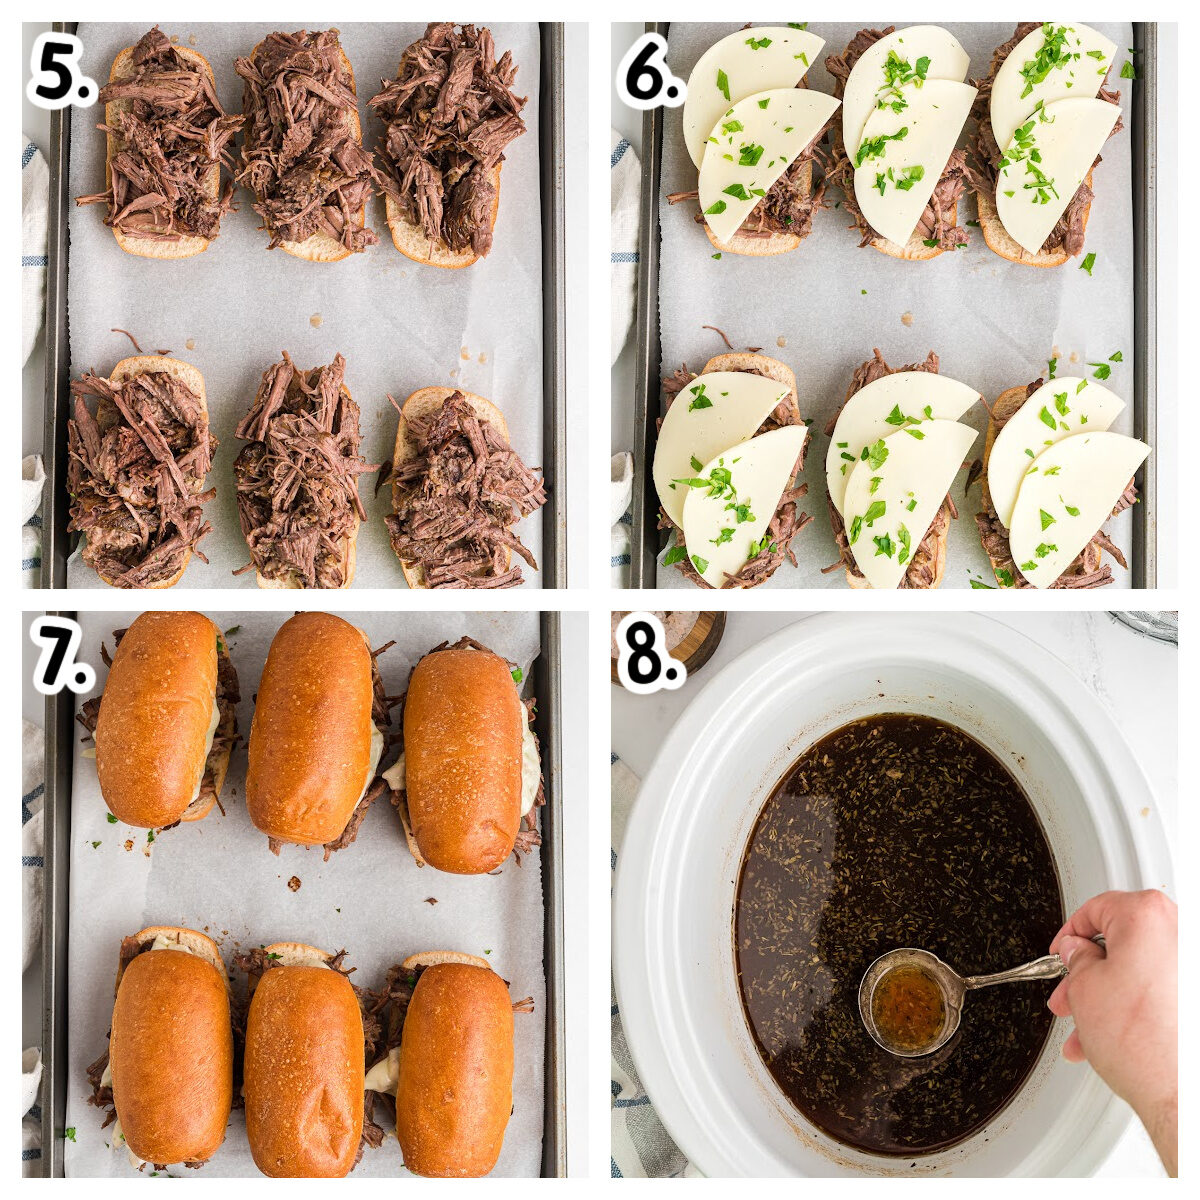 4 image showing how to assemble french dips sandwiches on hoagies.